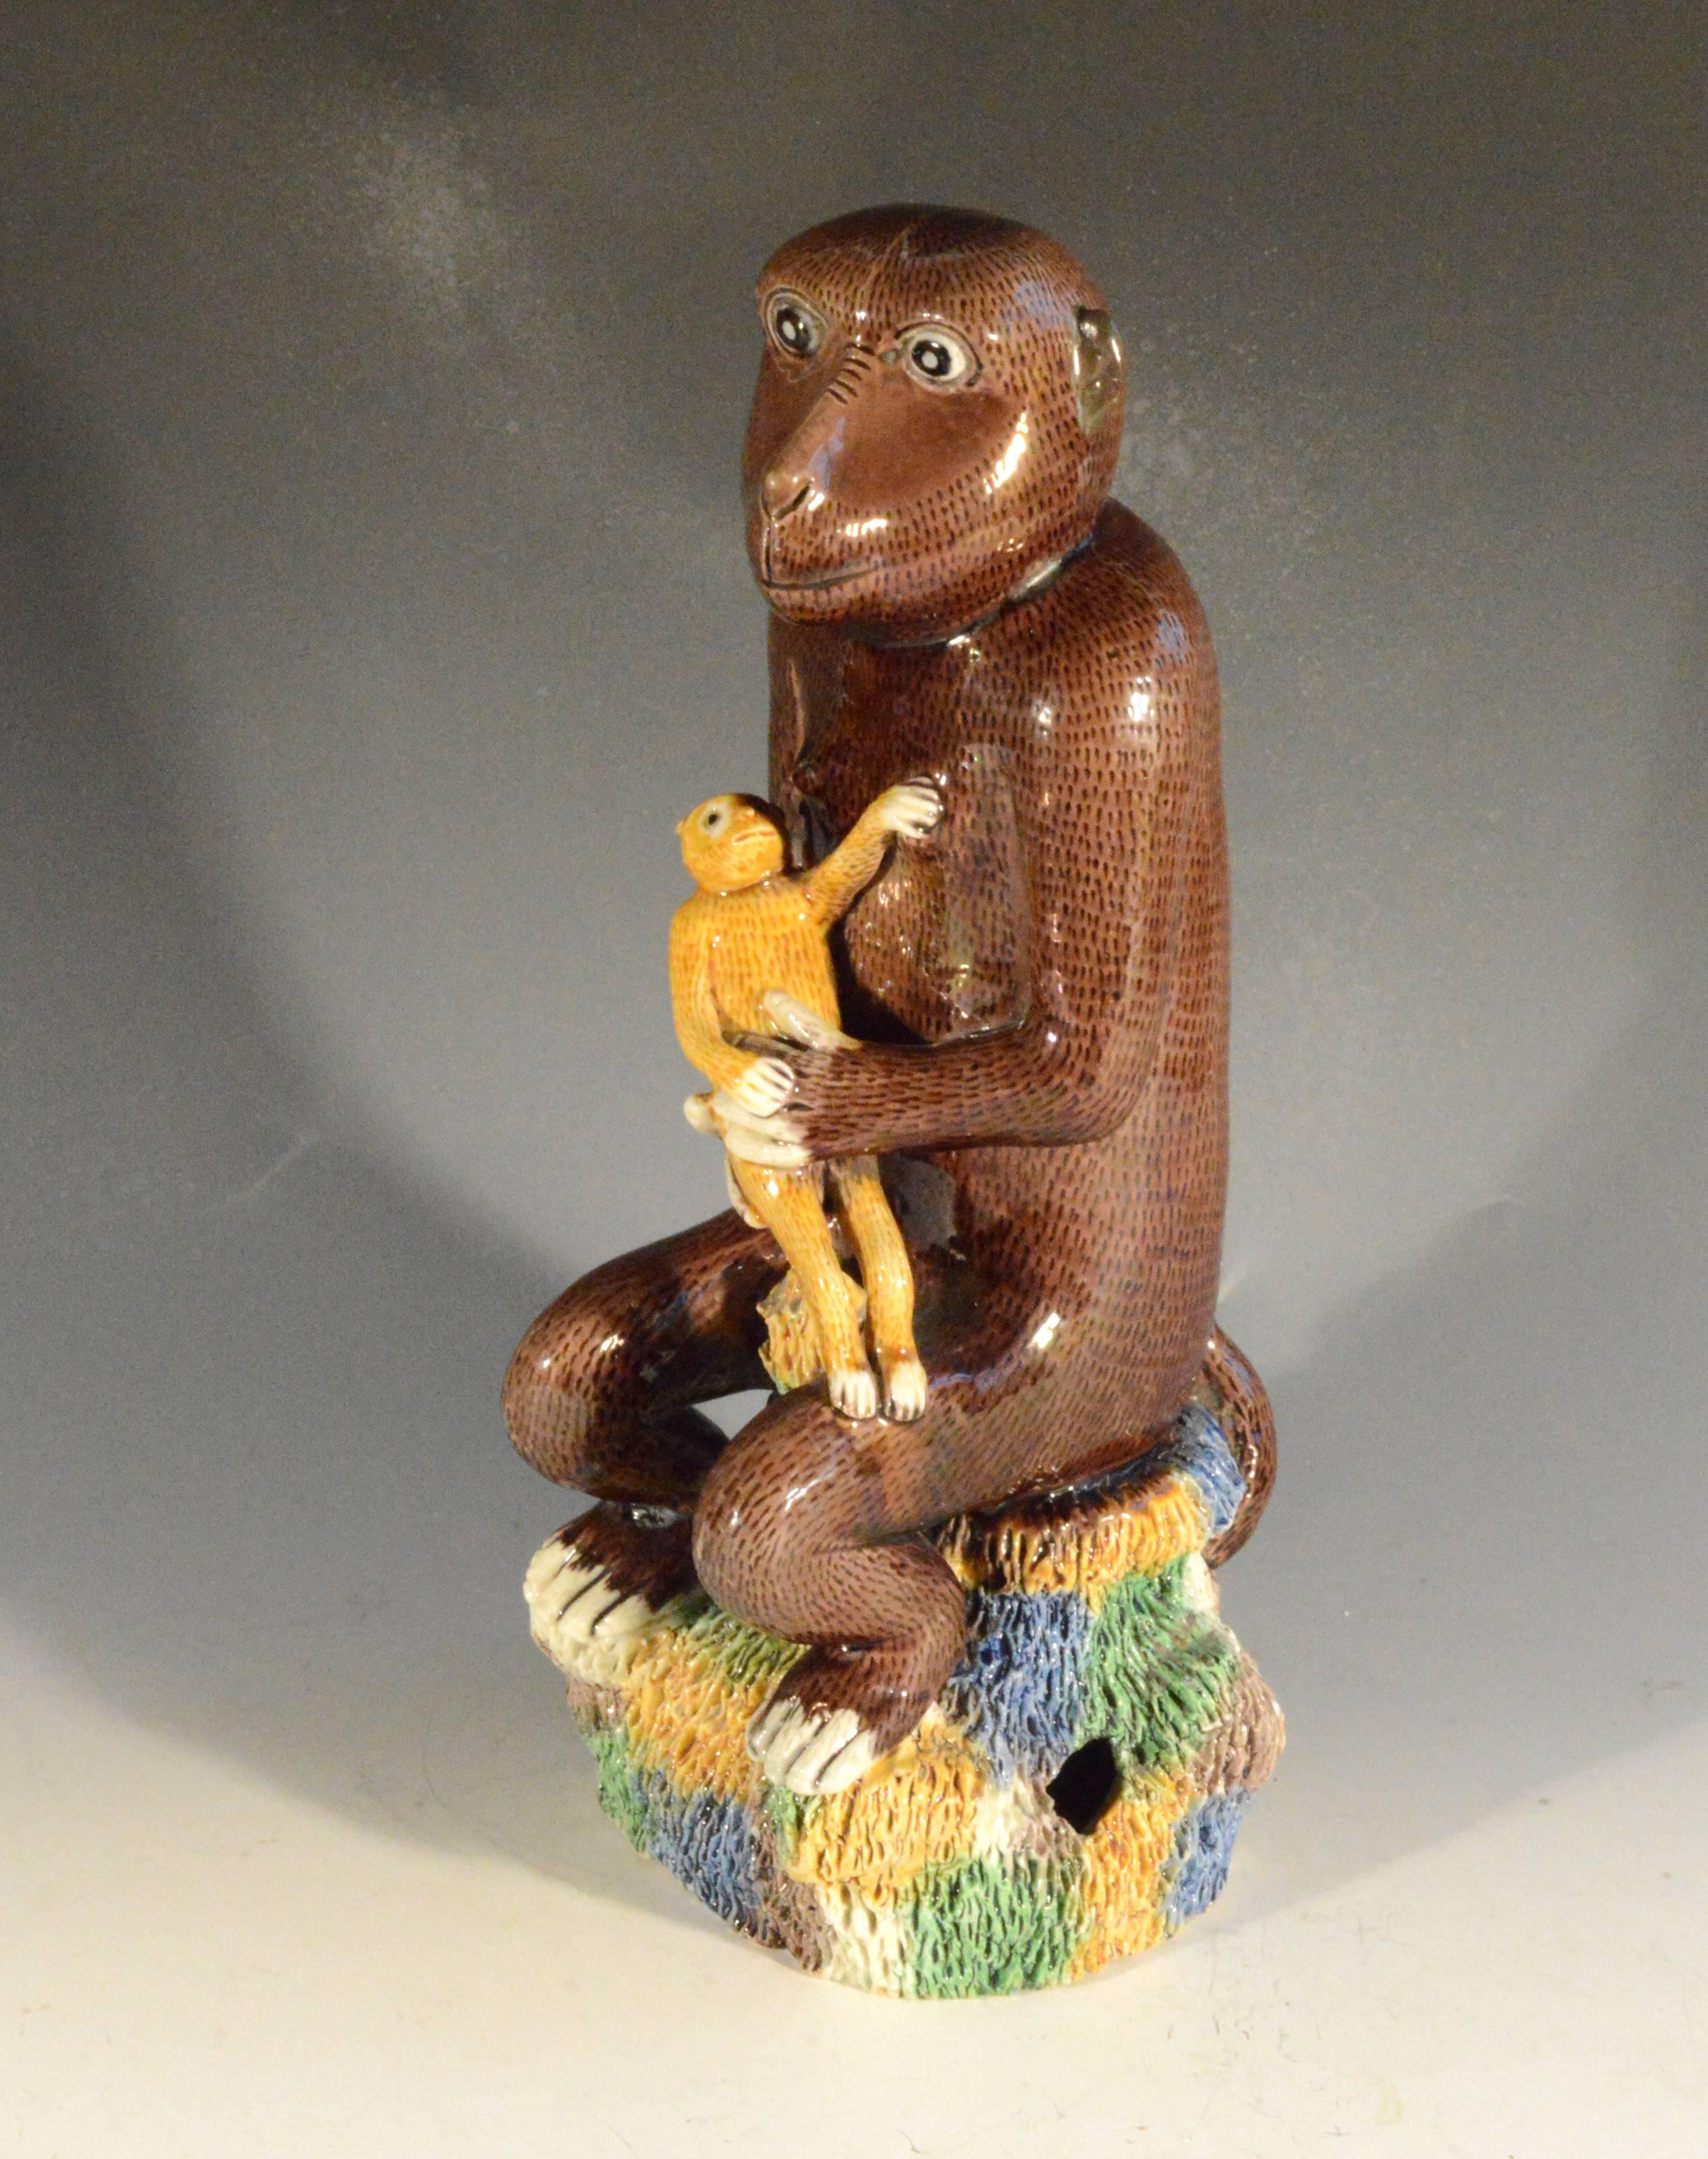 Porcelain Chinese Export Glazed Biscuit Model of Monkey, 18th-Early 19th Century